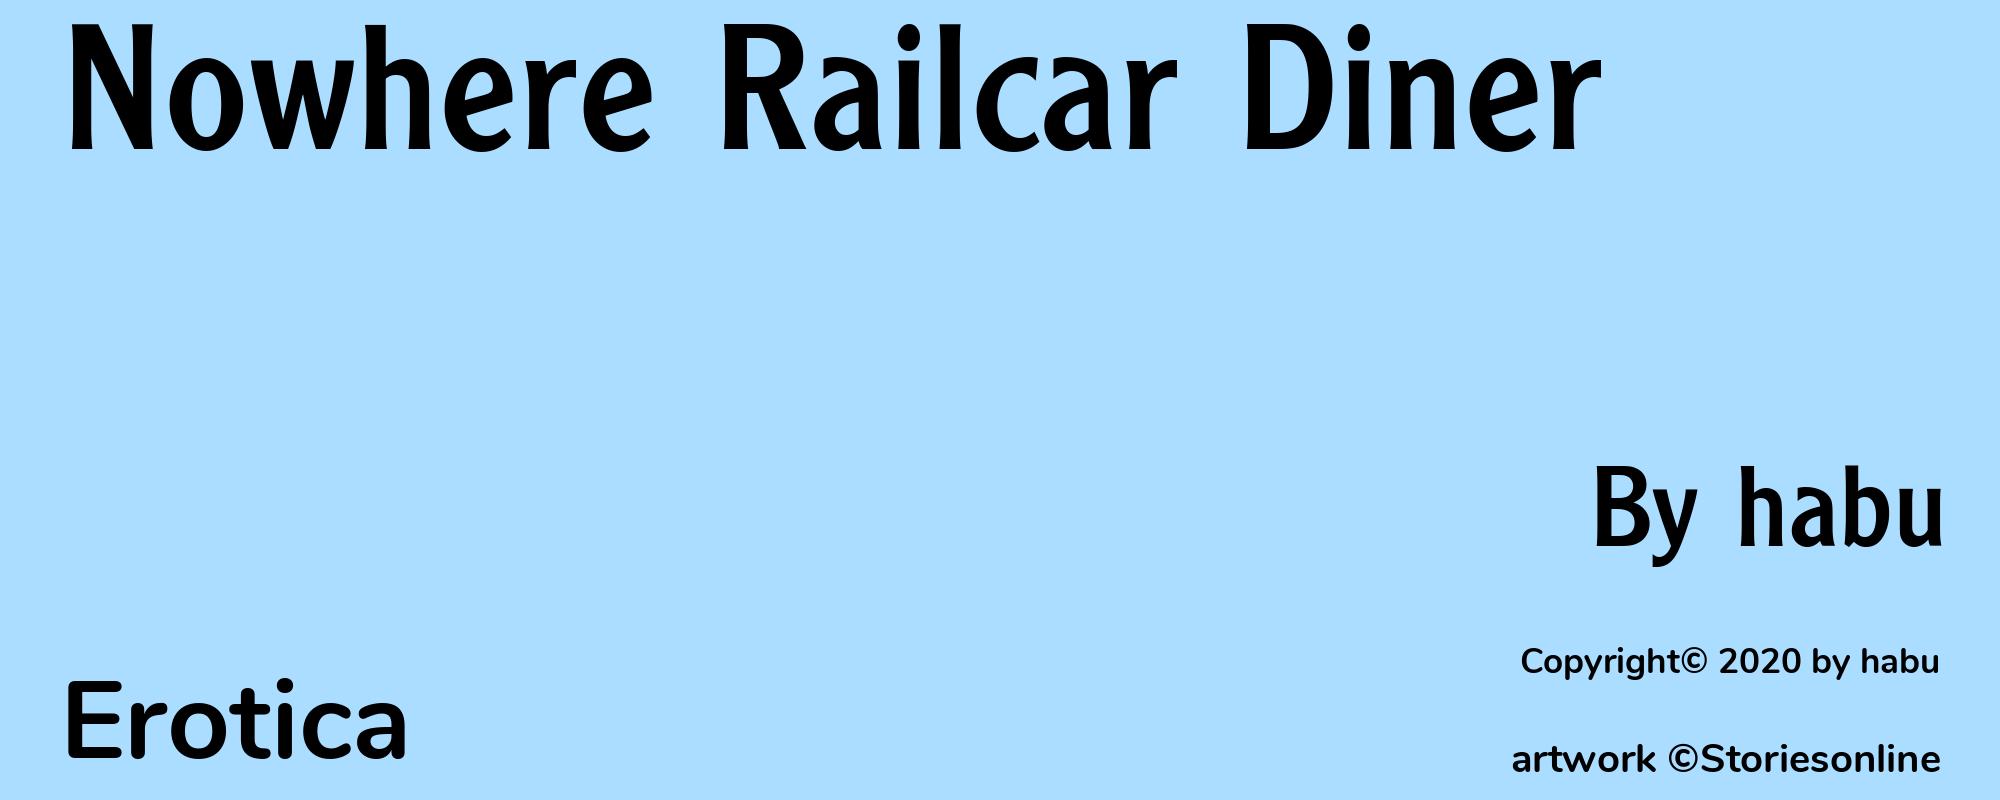 Nowhere Railcar Diner - Cover